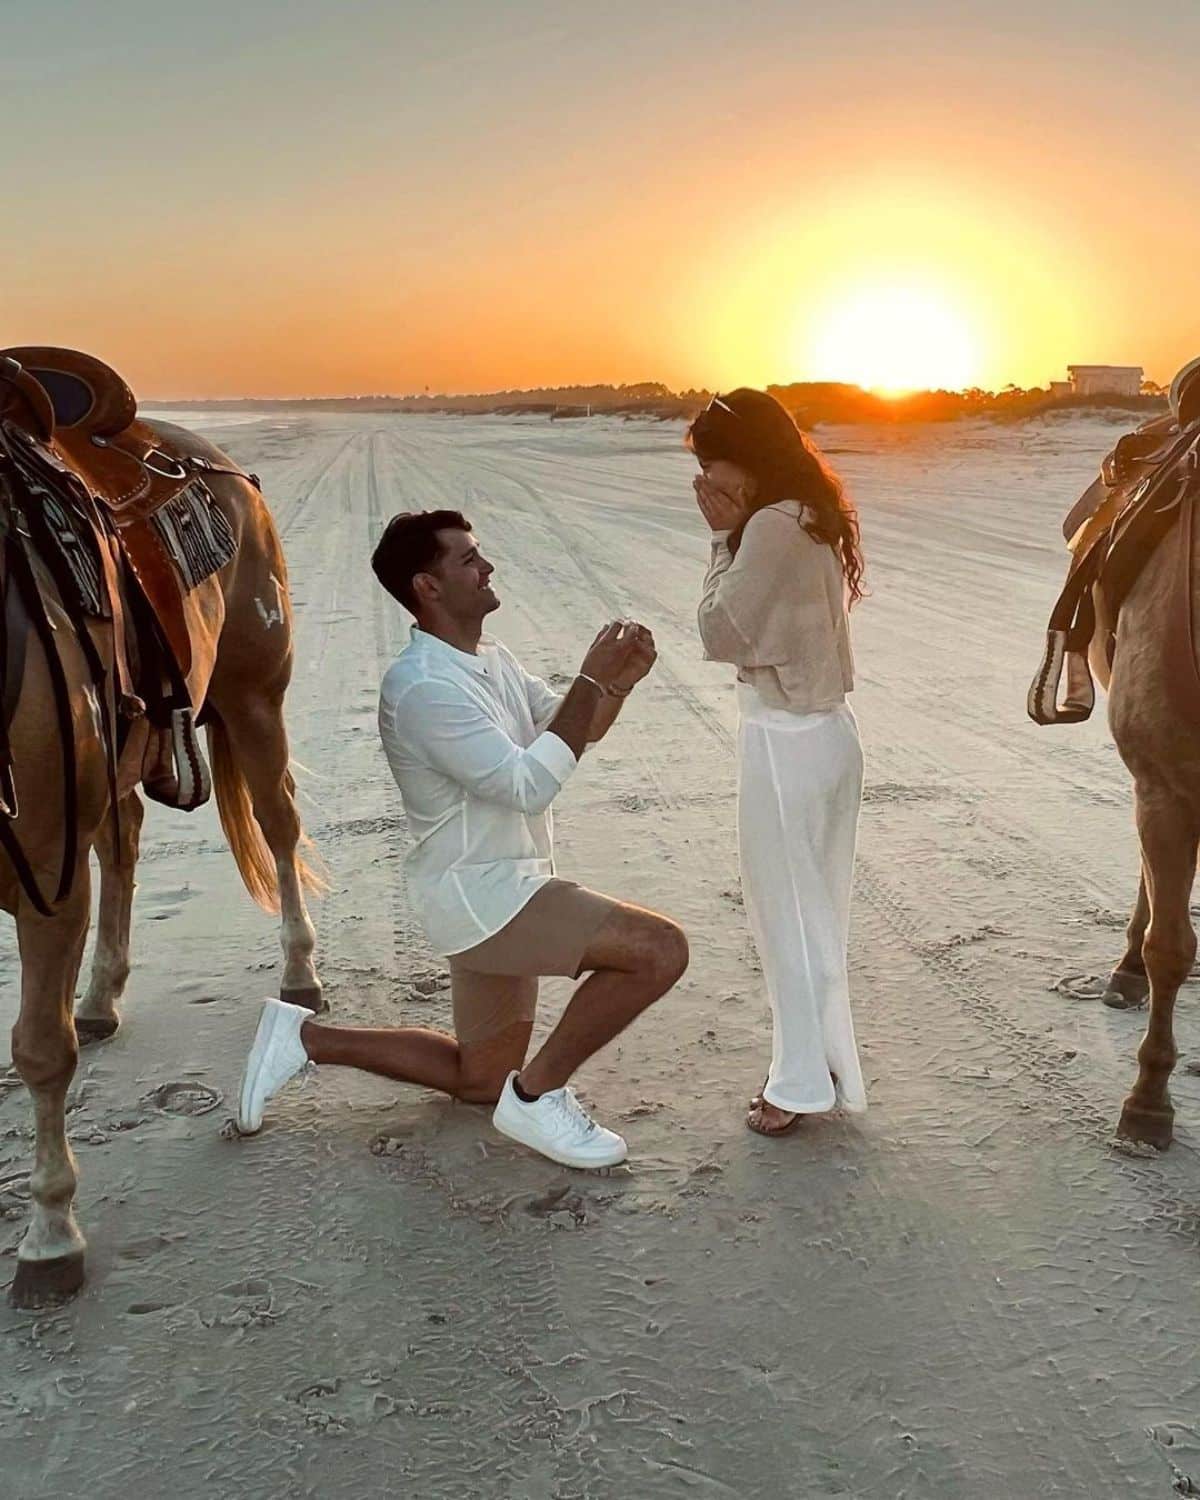 A man proposes to his girlfriend with two horses around.